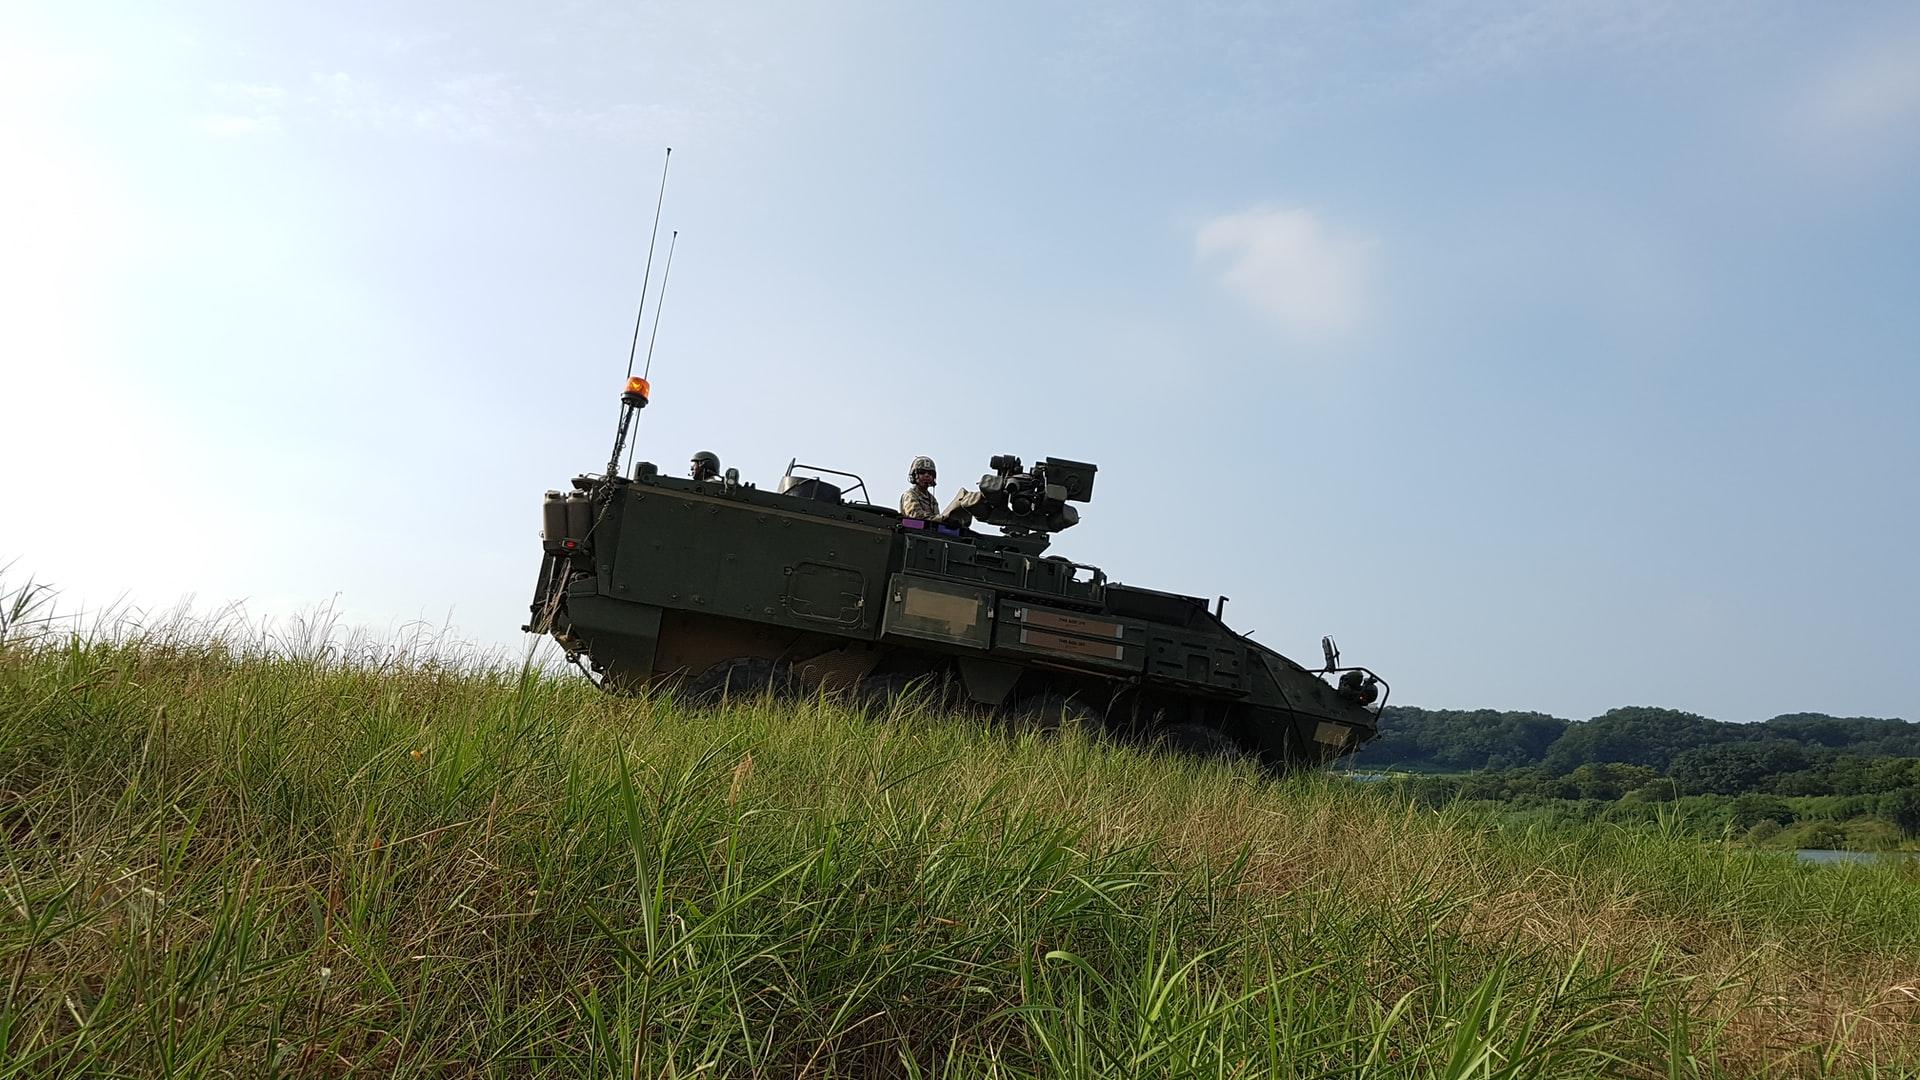 The U.S. Marine Corps is looking to replace their light armored vehicles.